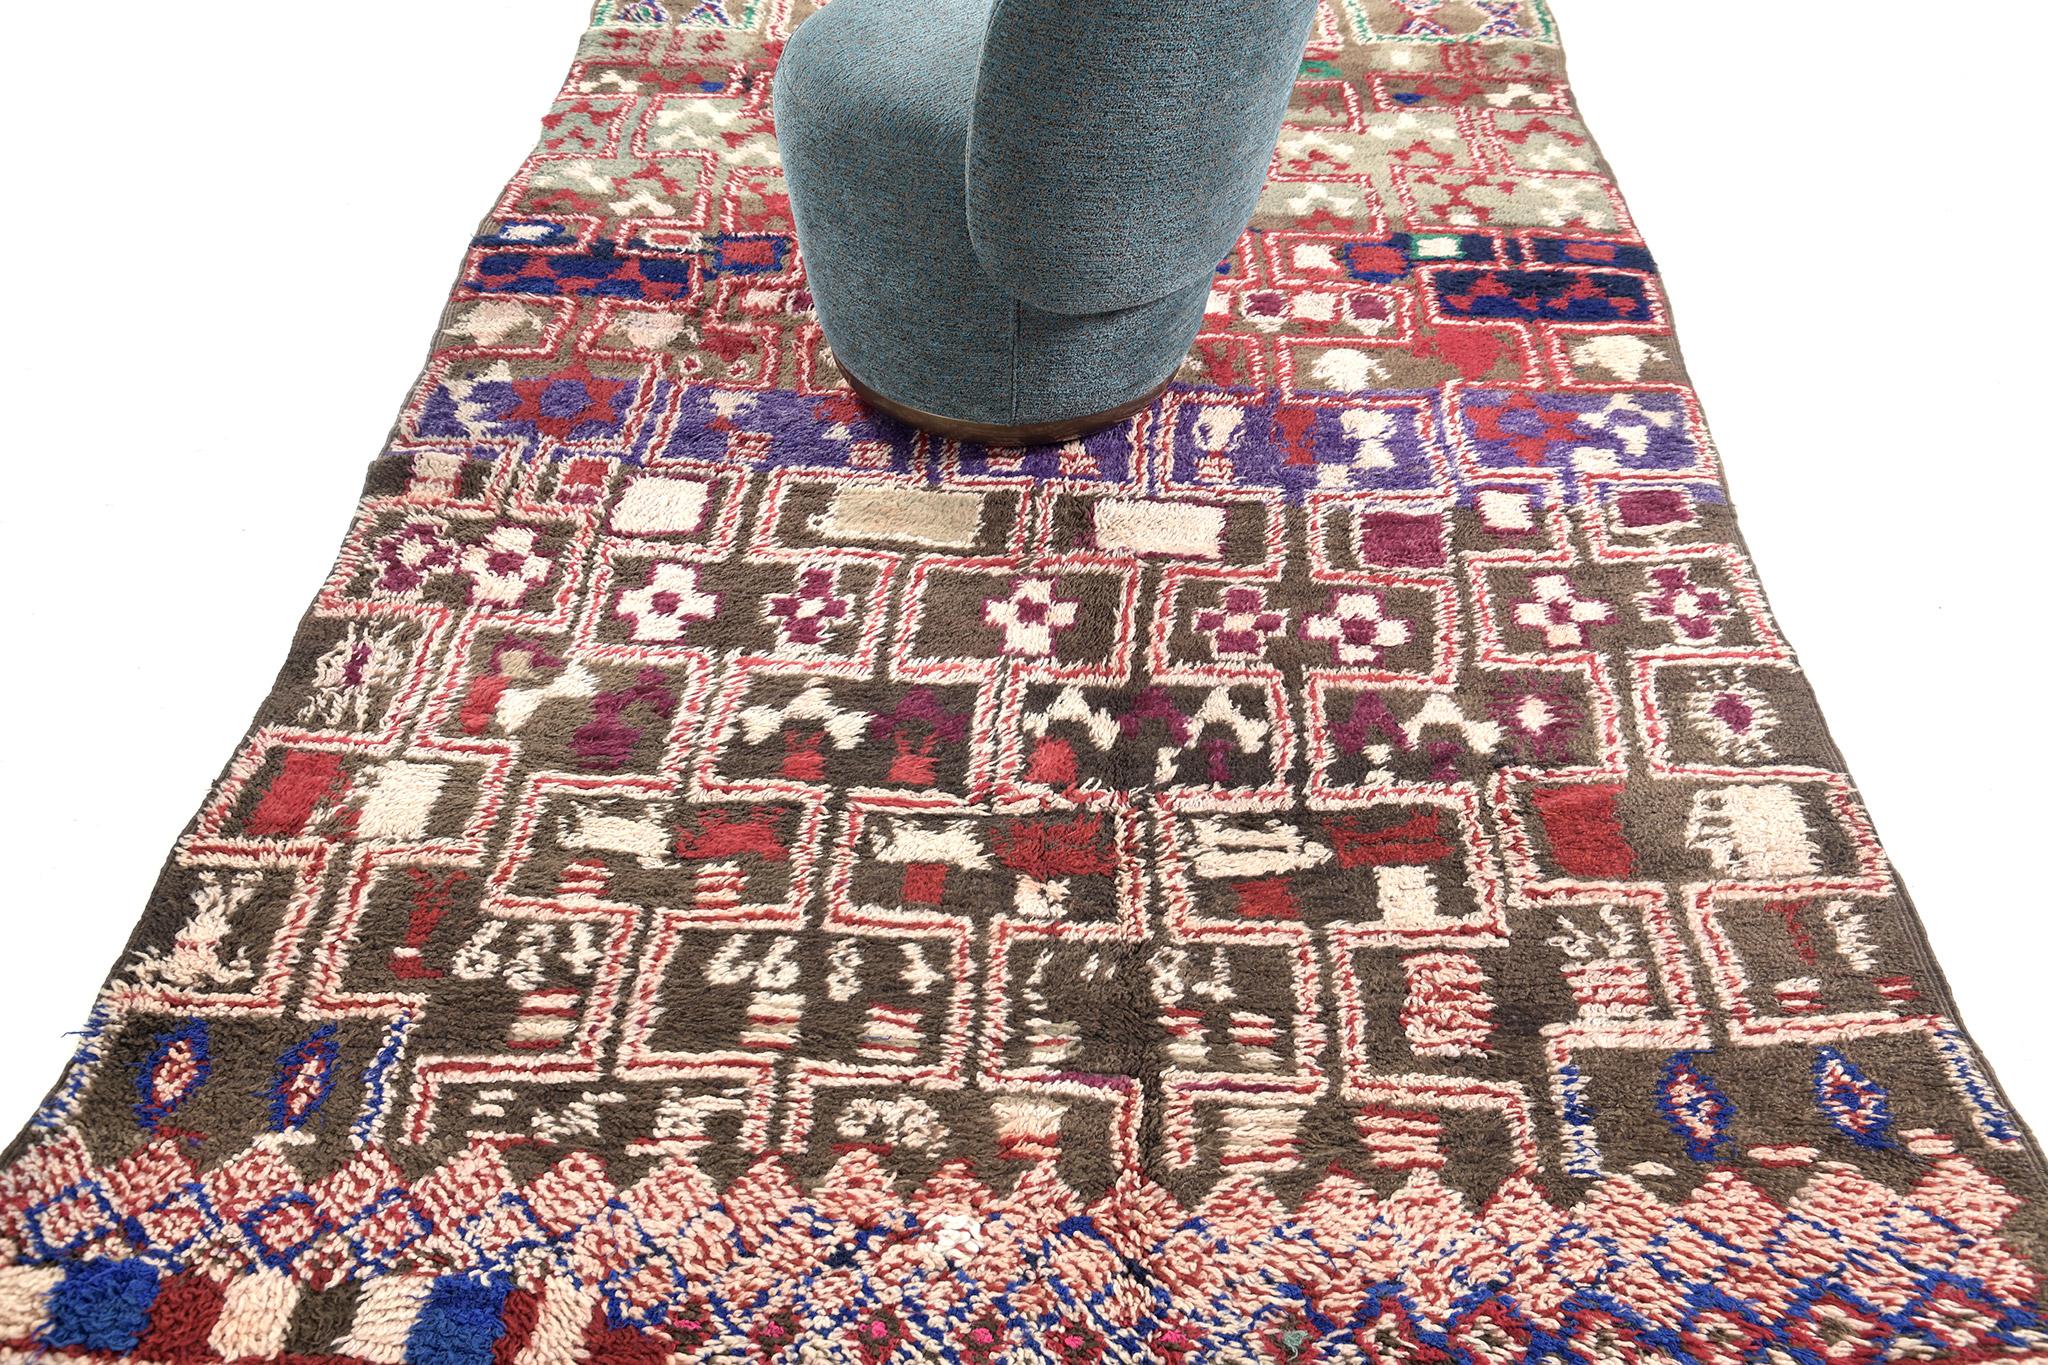 Be captivated by this mesmerizing rug that displays eclectic character through its festive selections of colour scheme. This breathtaking rug features various and ambiguous Berber patterns. Sink your feet into this Vintage Moroccan Ourain rug that